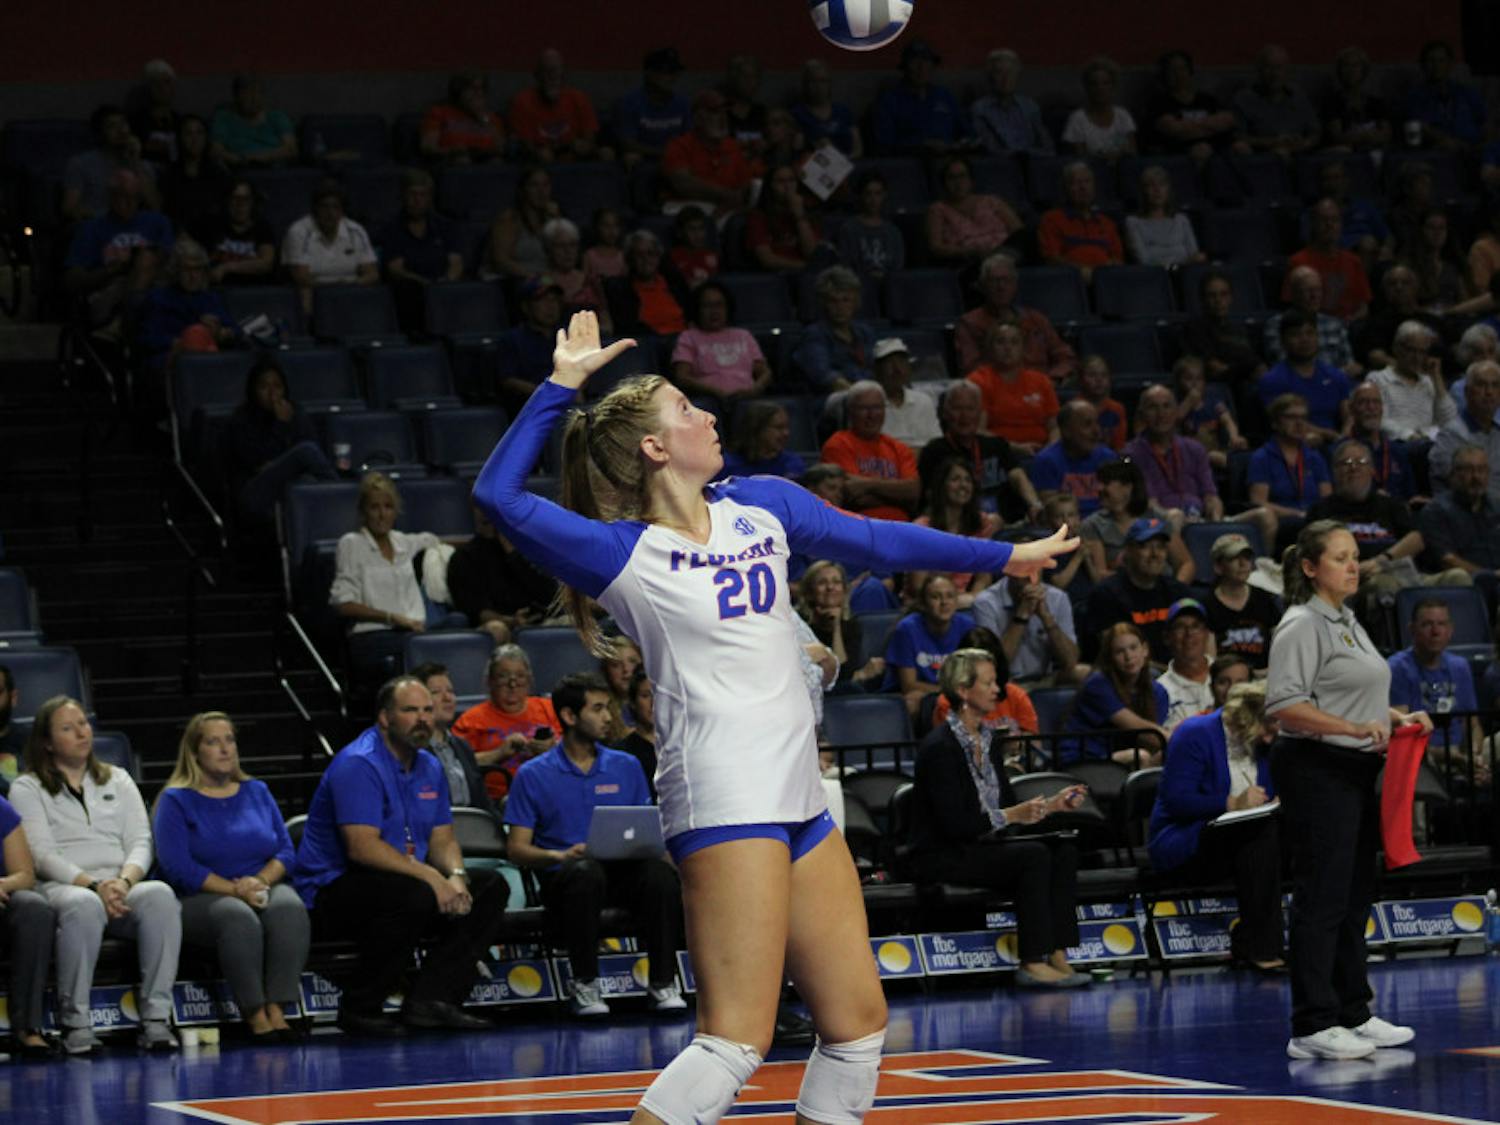 Freshman Thayer Hall ended the win over Georgia with 11 kills and hit a shade under .180 for the match.